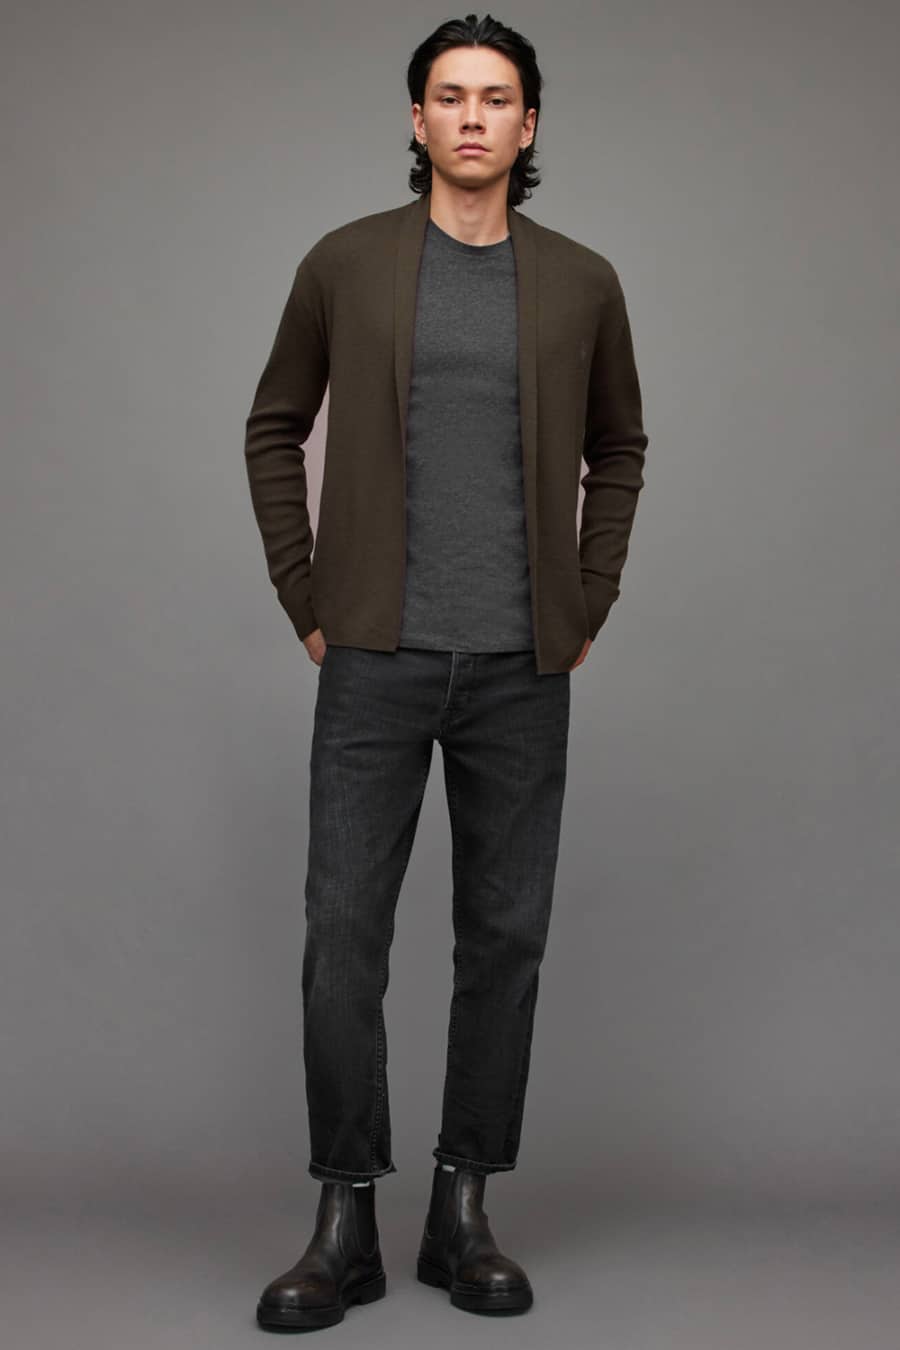 Men's black jeans, charcoal T-shirt, green cardigan and leather Chelsea boots outfit